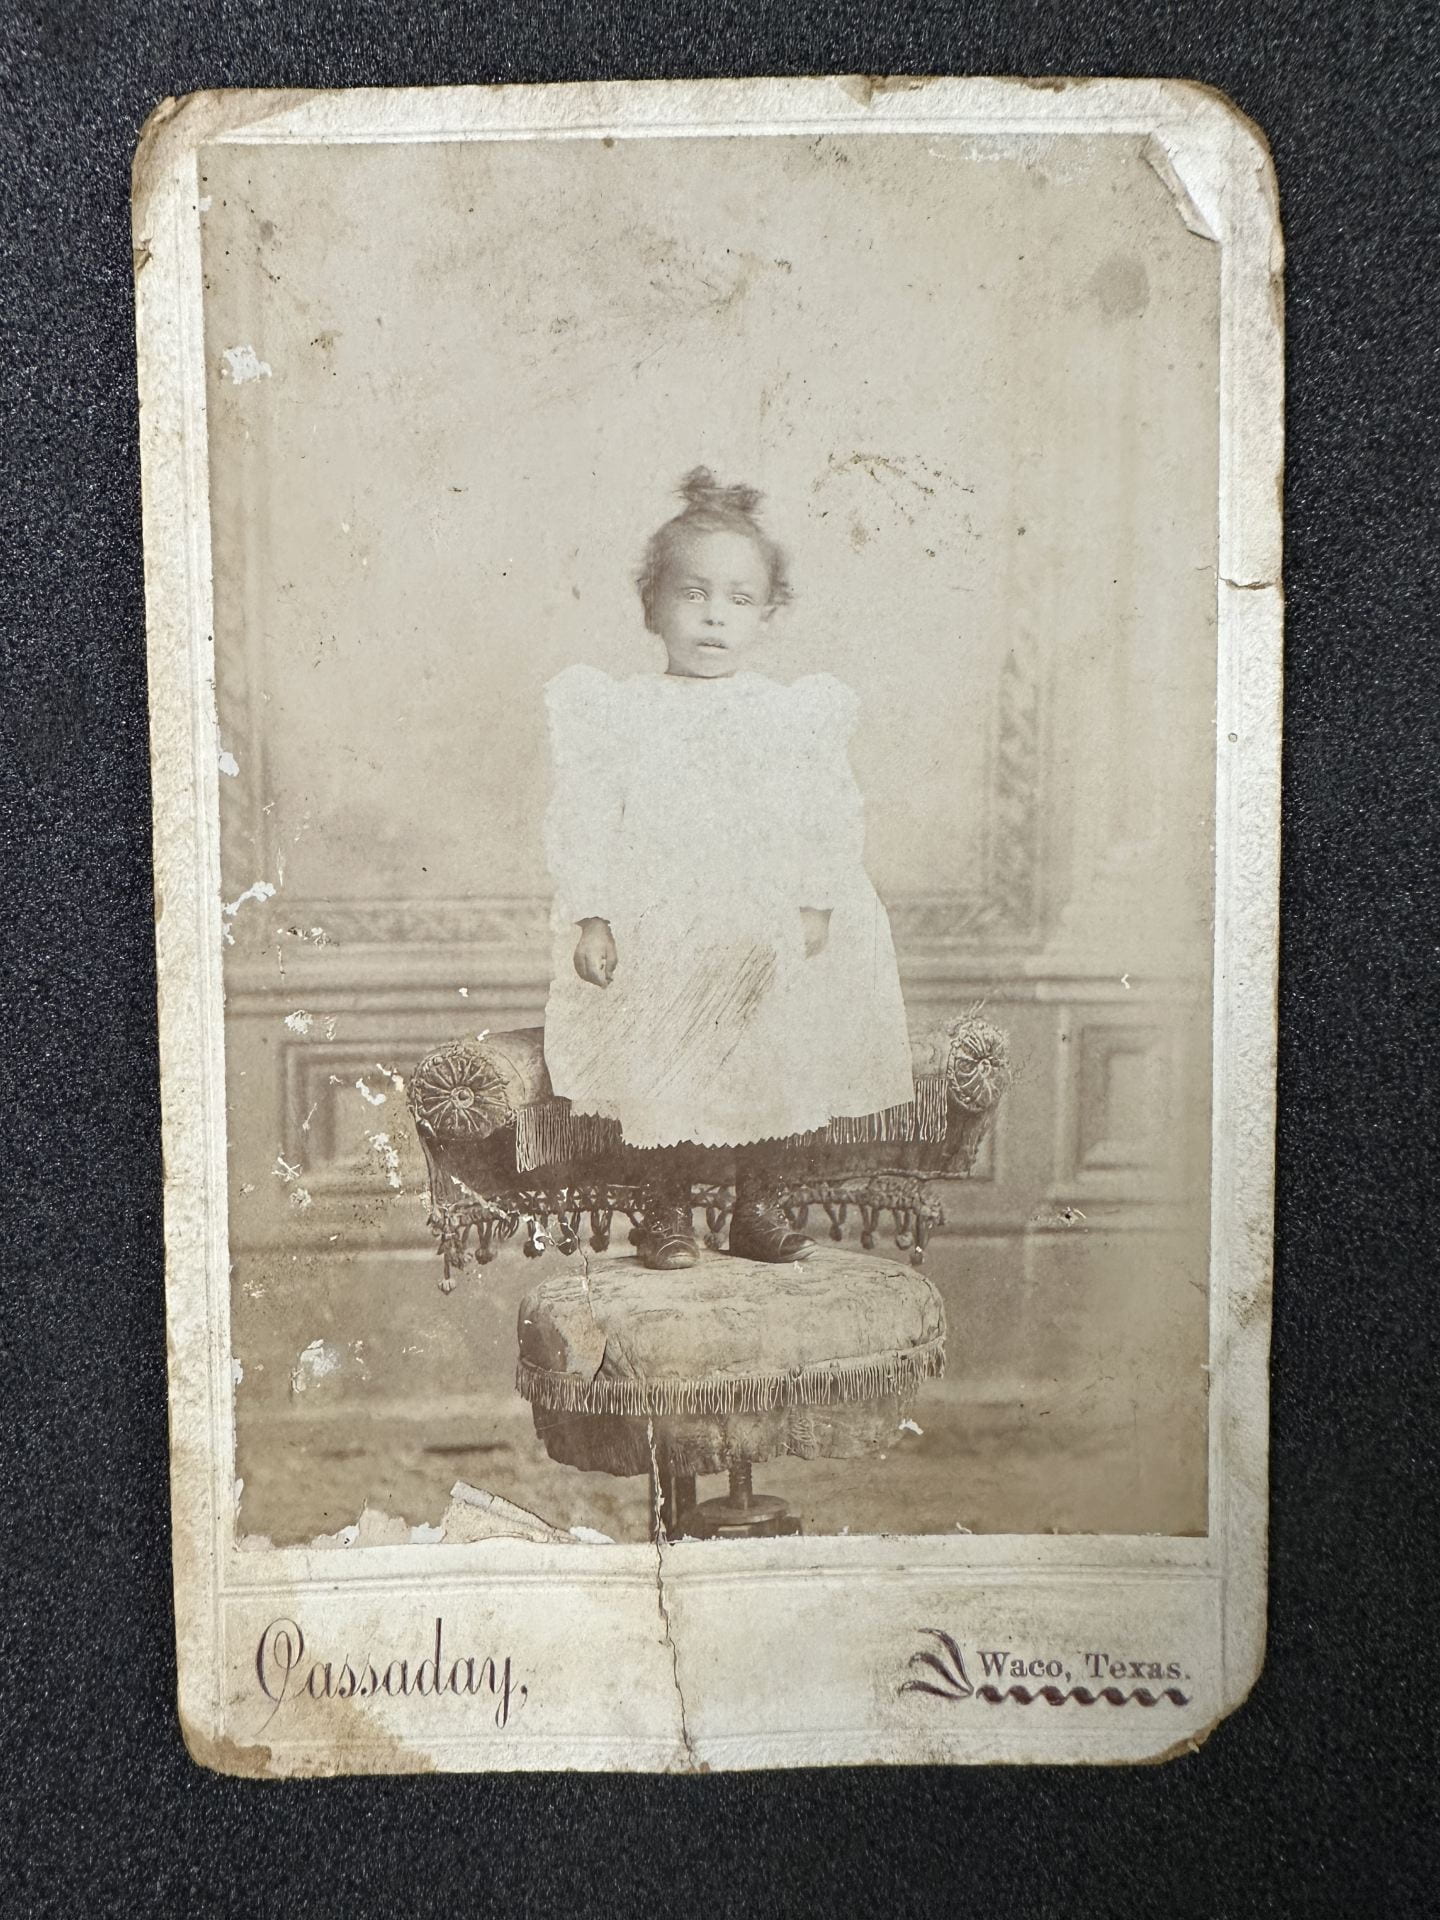 Black-and-white photograph of a young child in a white dress standing on a posing chair.